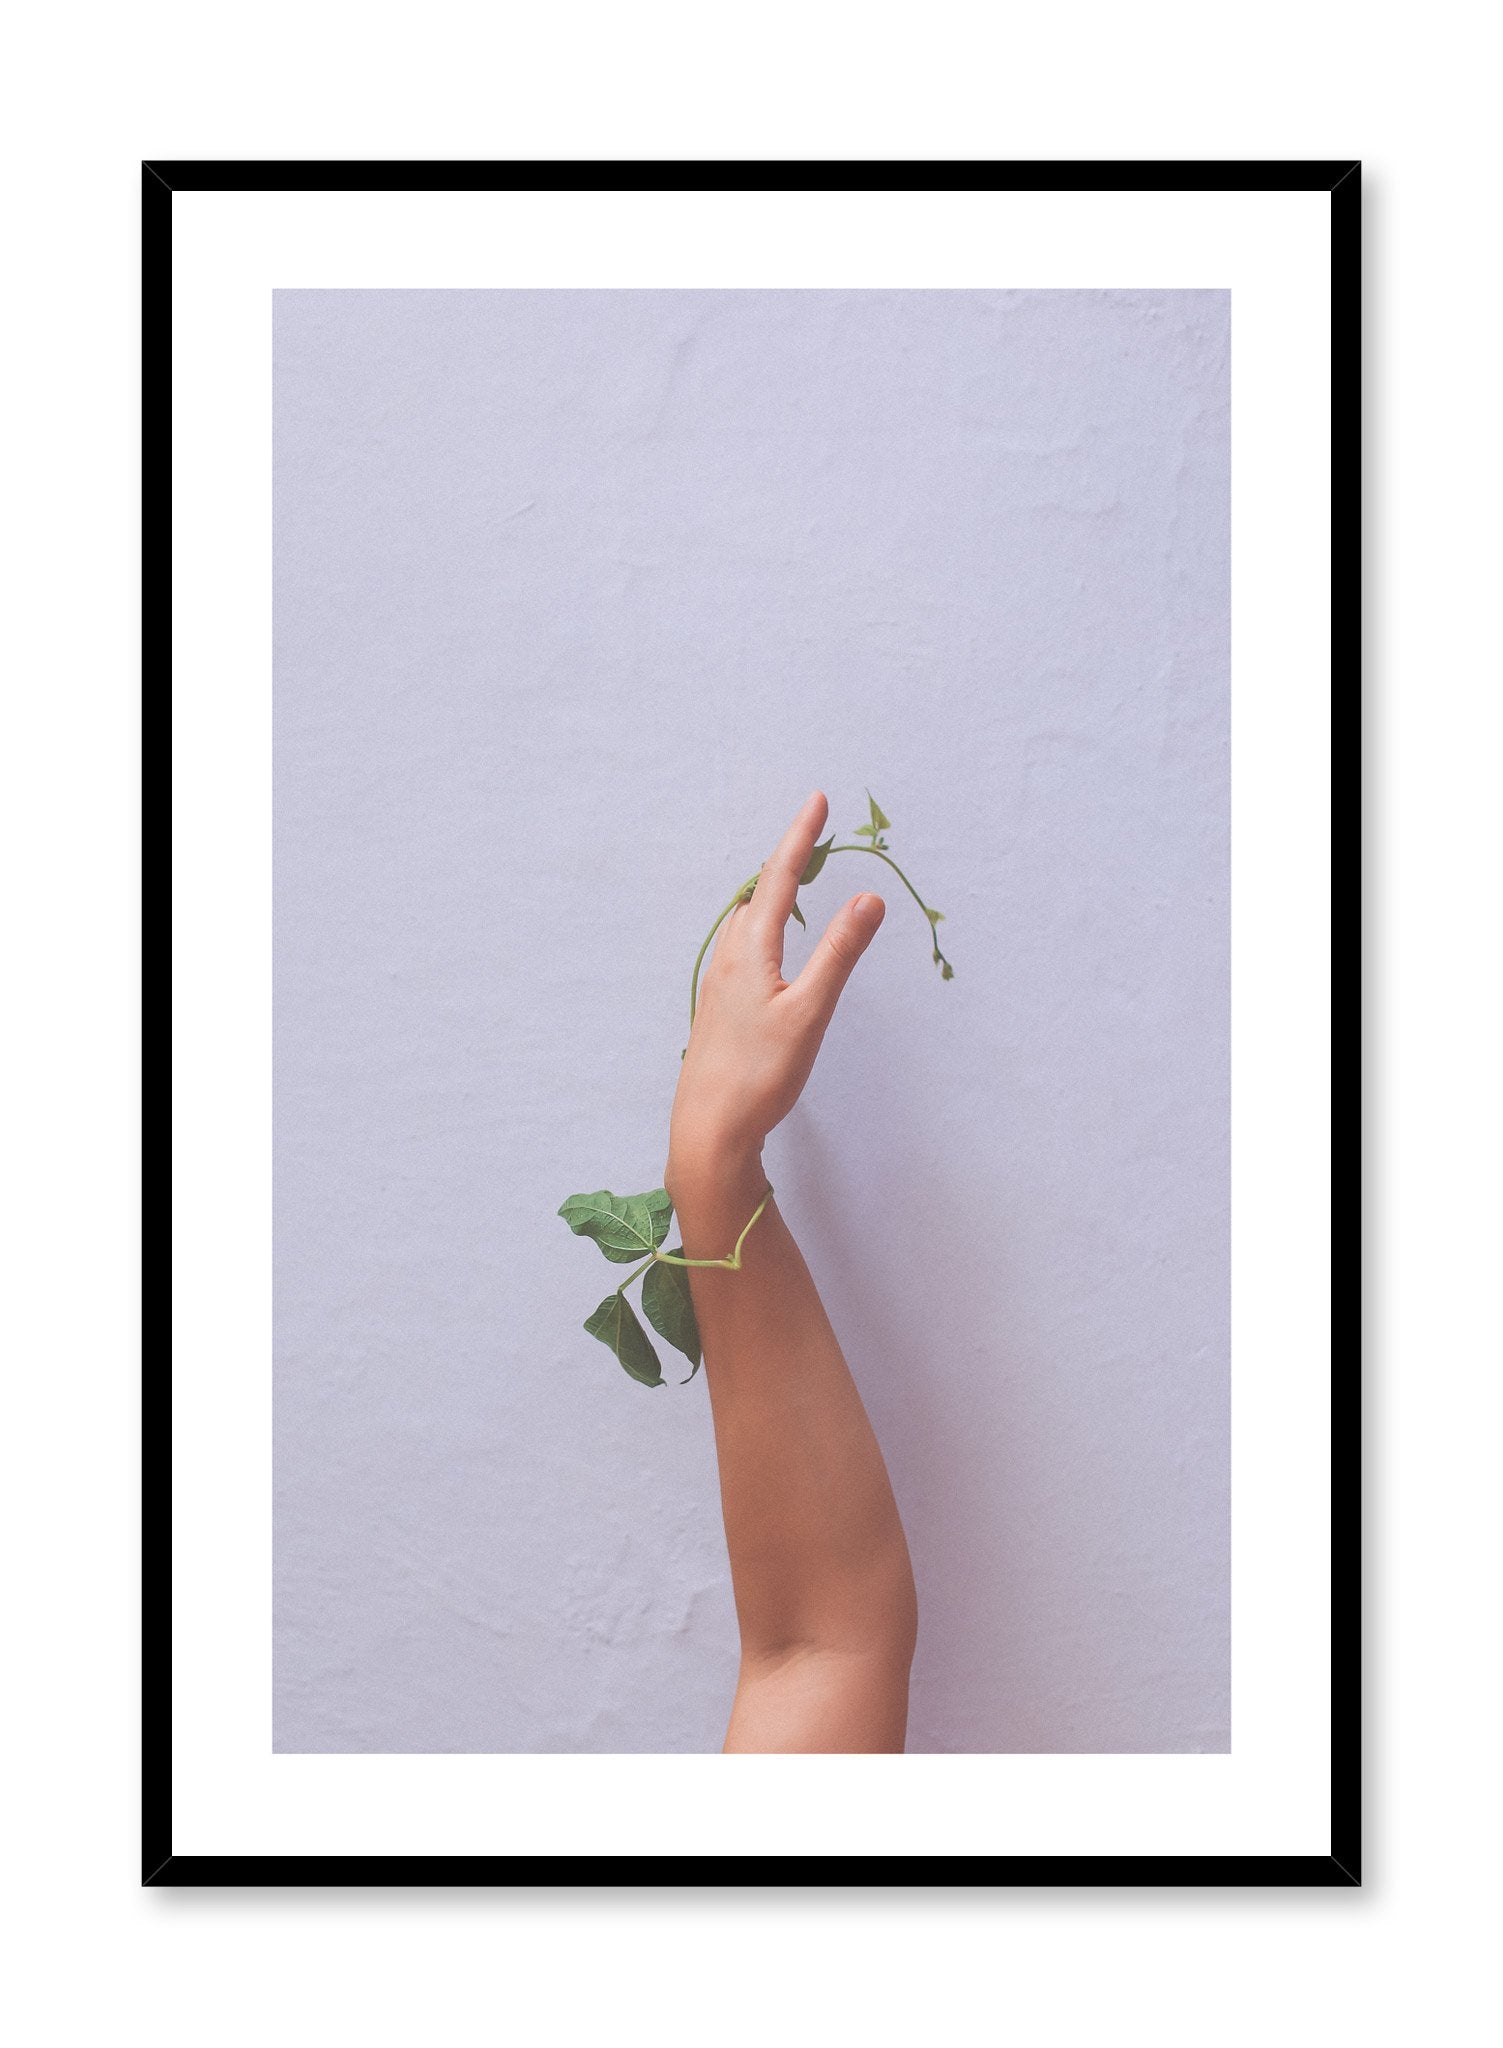 "Skin & Foliage" is a minimalist photography poster by Opposite Wall of a nude arm and hand entangled with a green leafy stem.